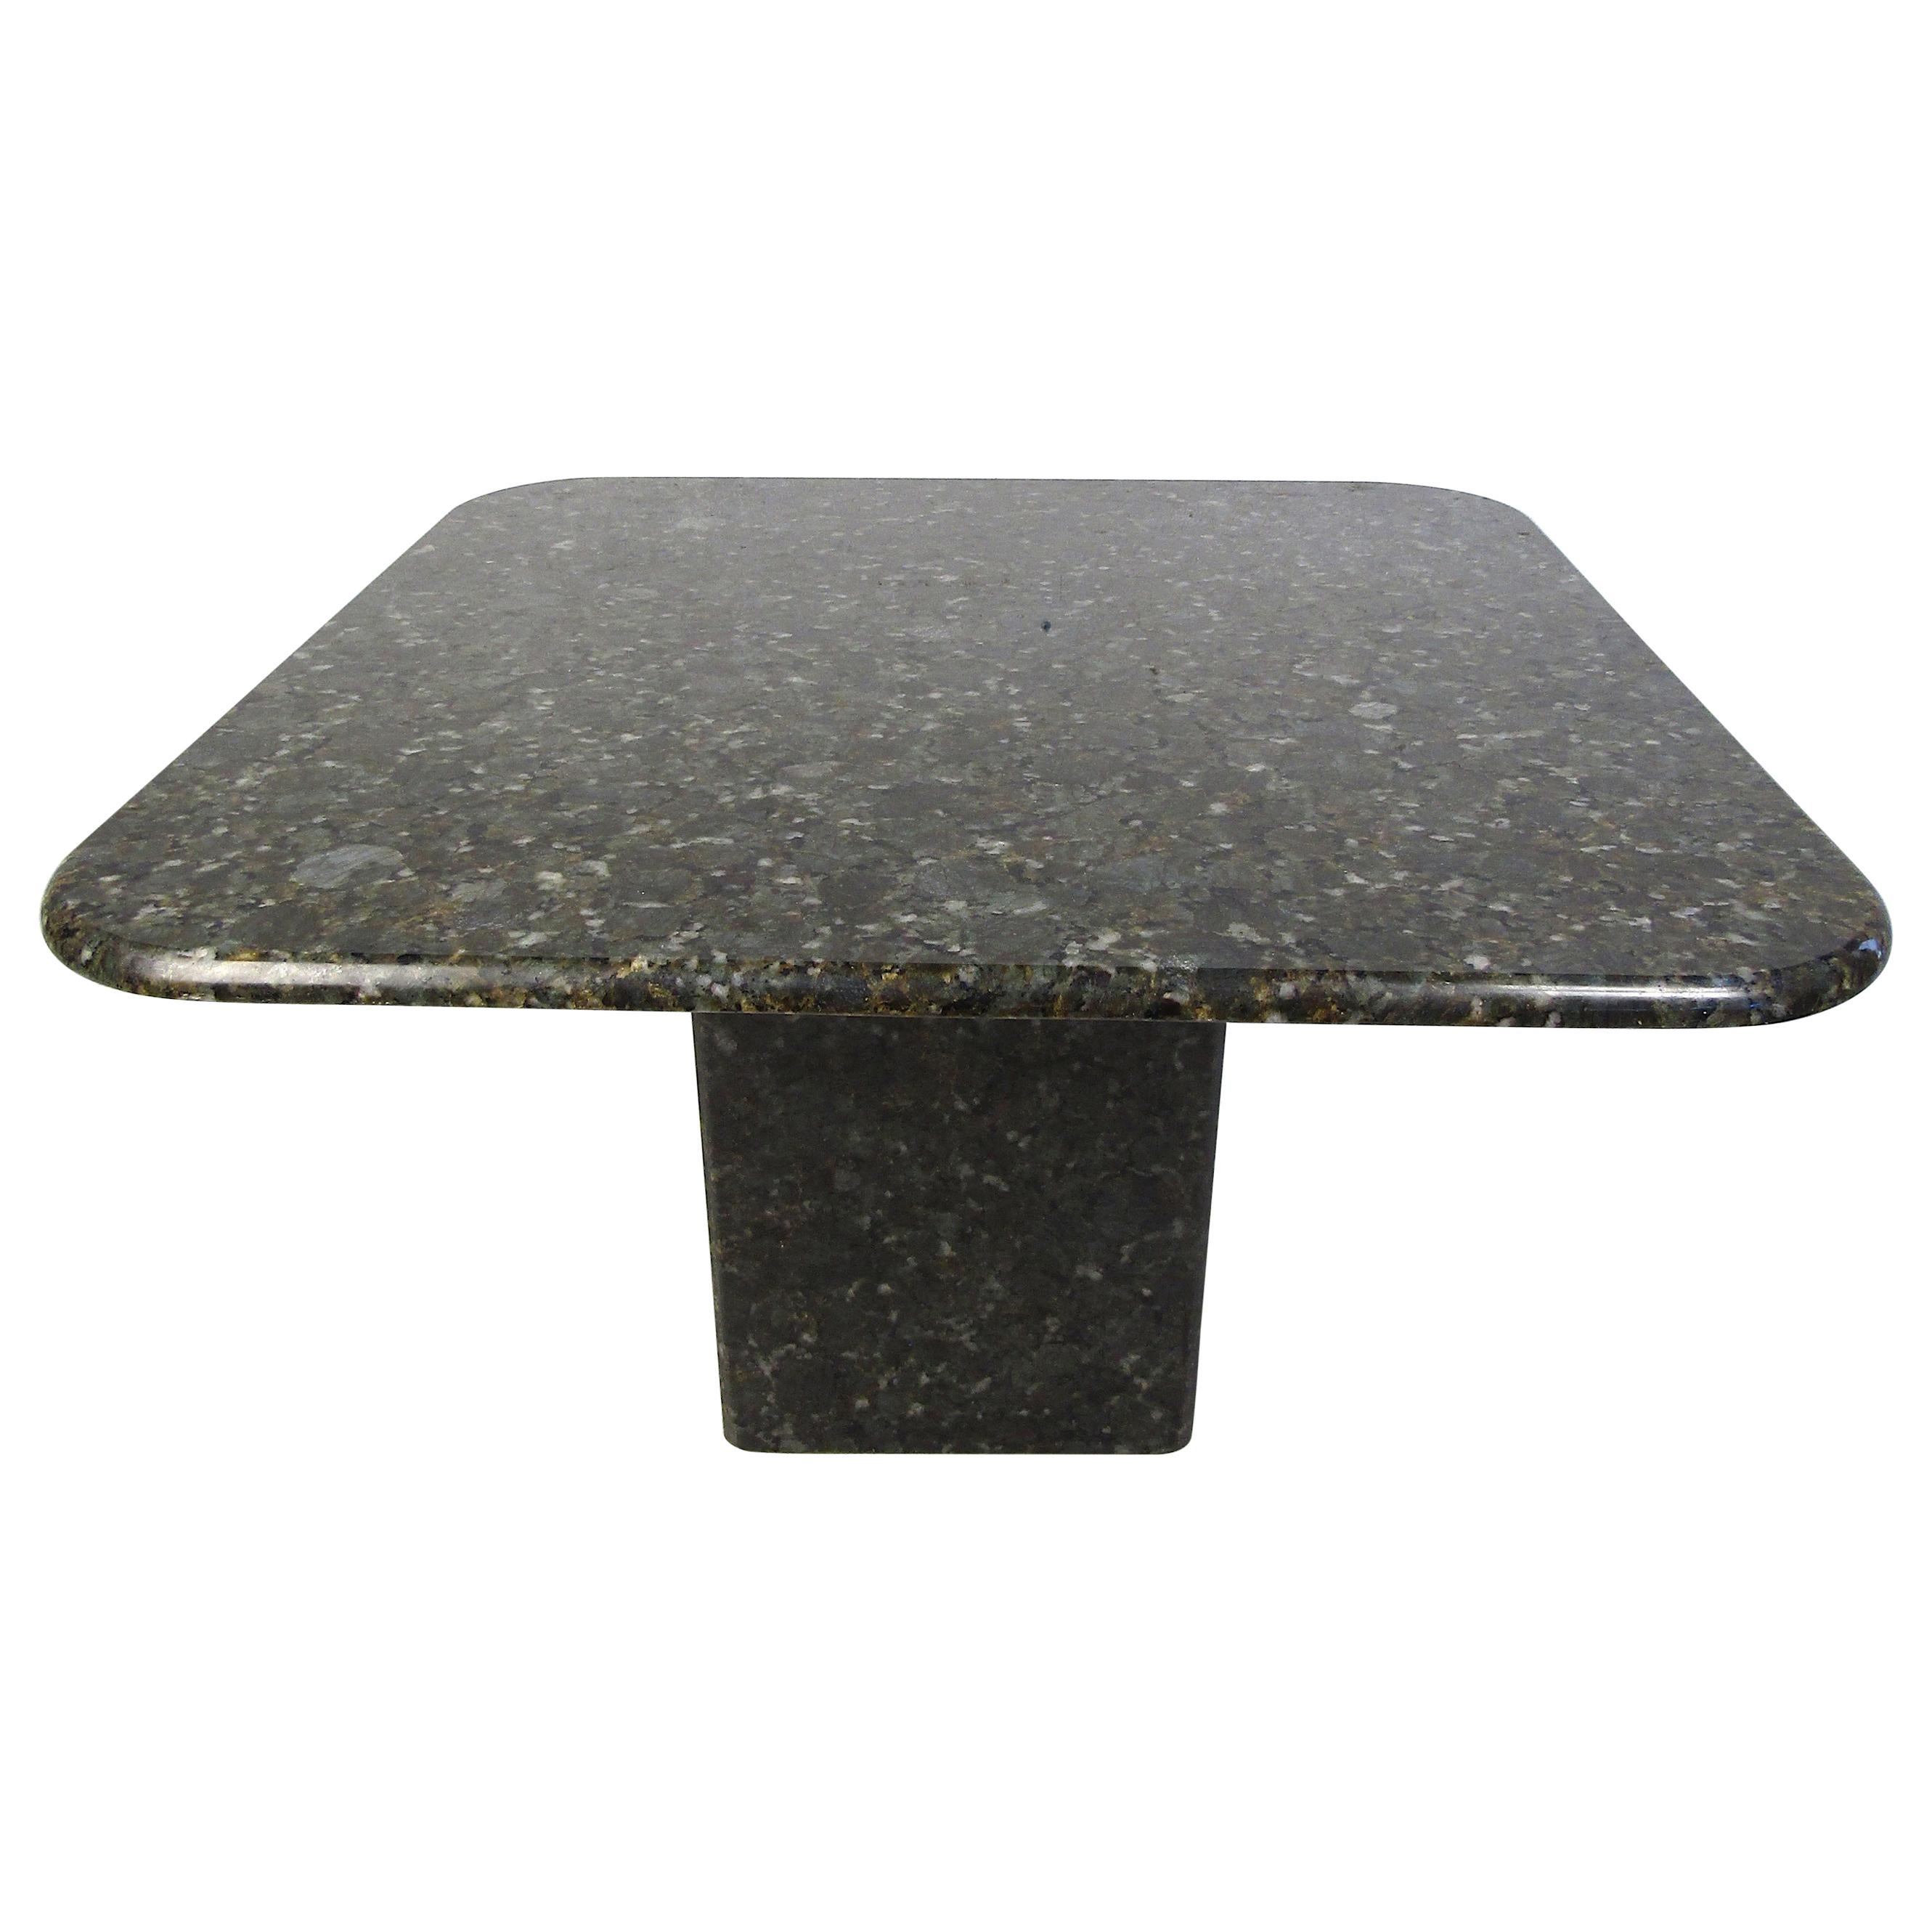 Granite Square Outdoor Dining Table